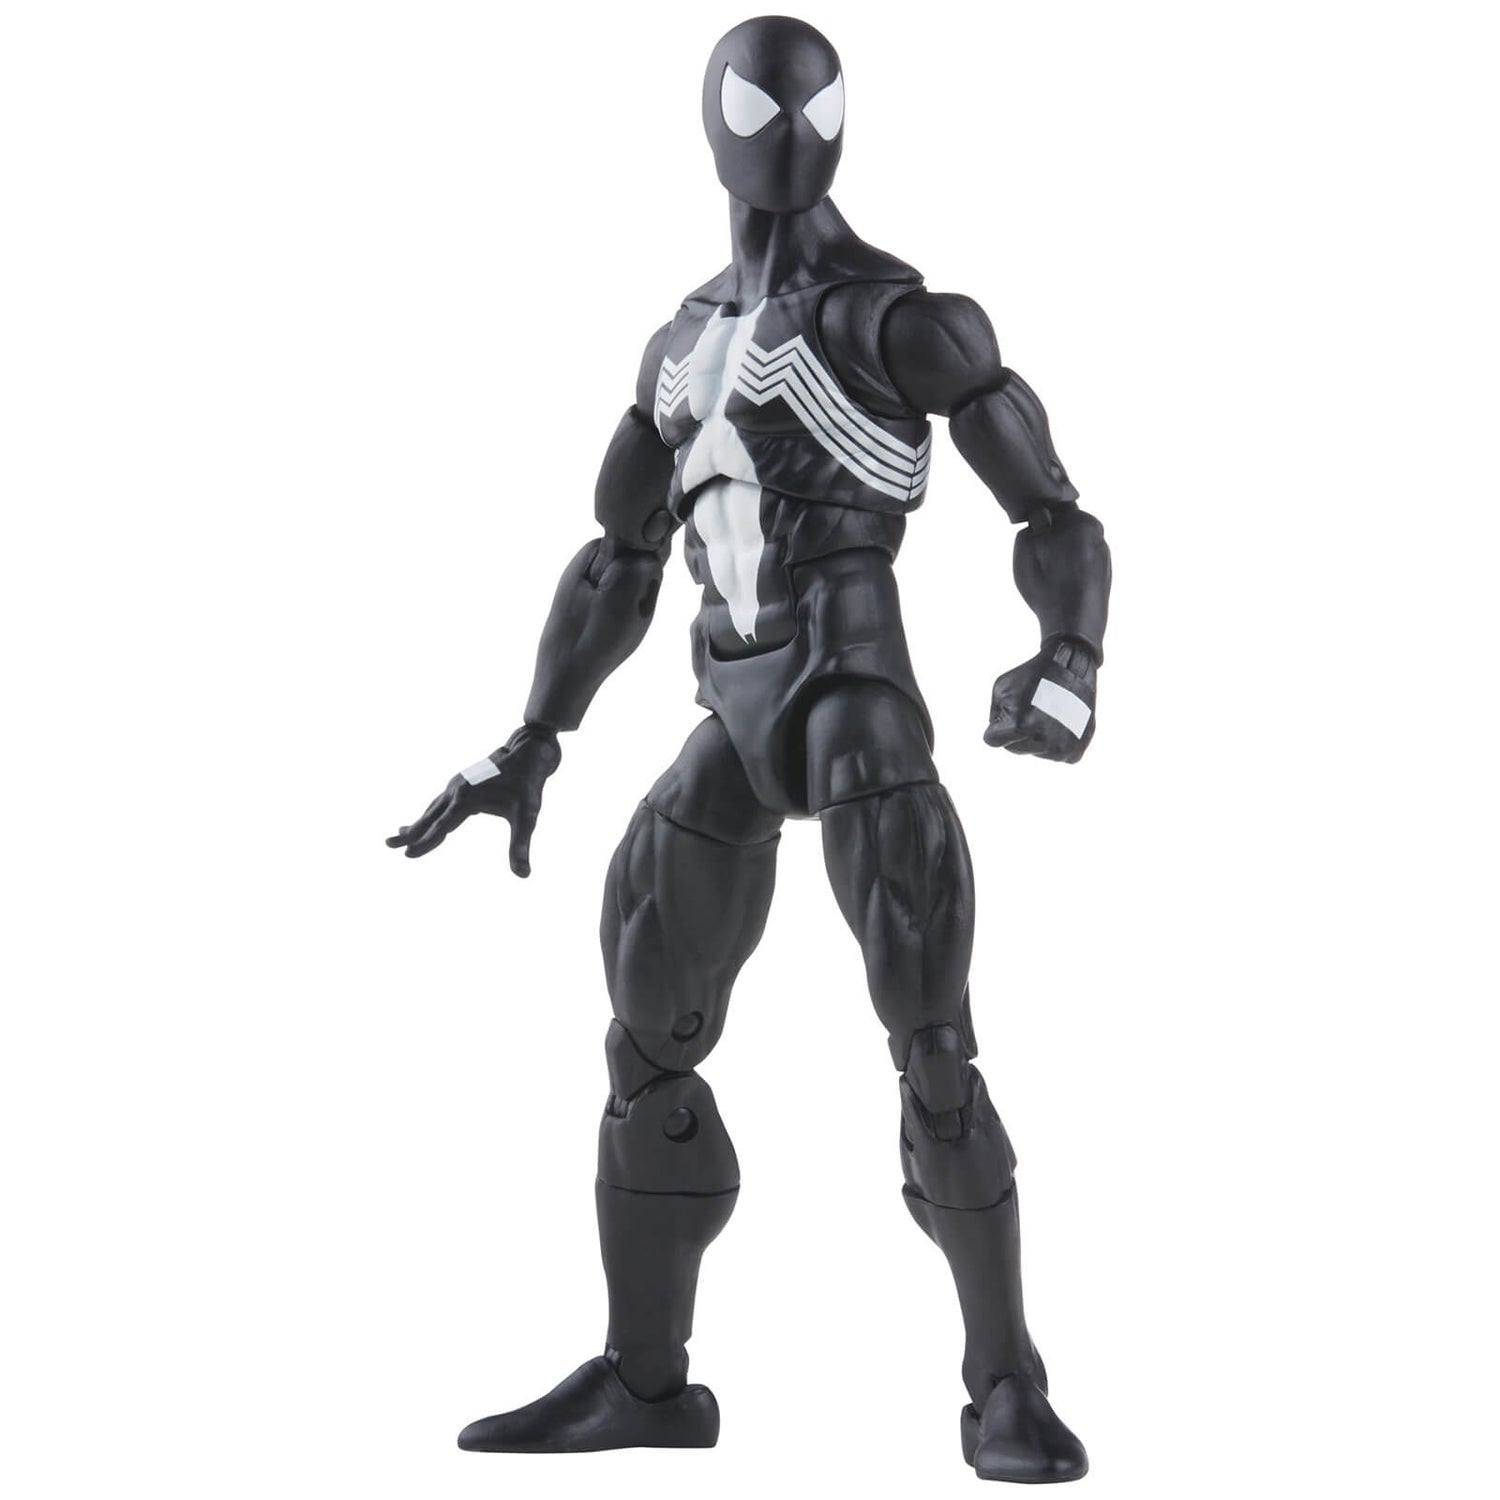 Spider-Man Marvel Legends Series 6-inch Symbiote Action Figure Toy Includes 4 Accessories 4 Alternate Hands 